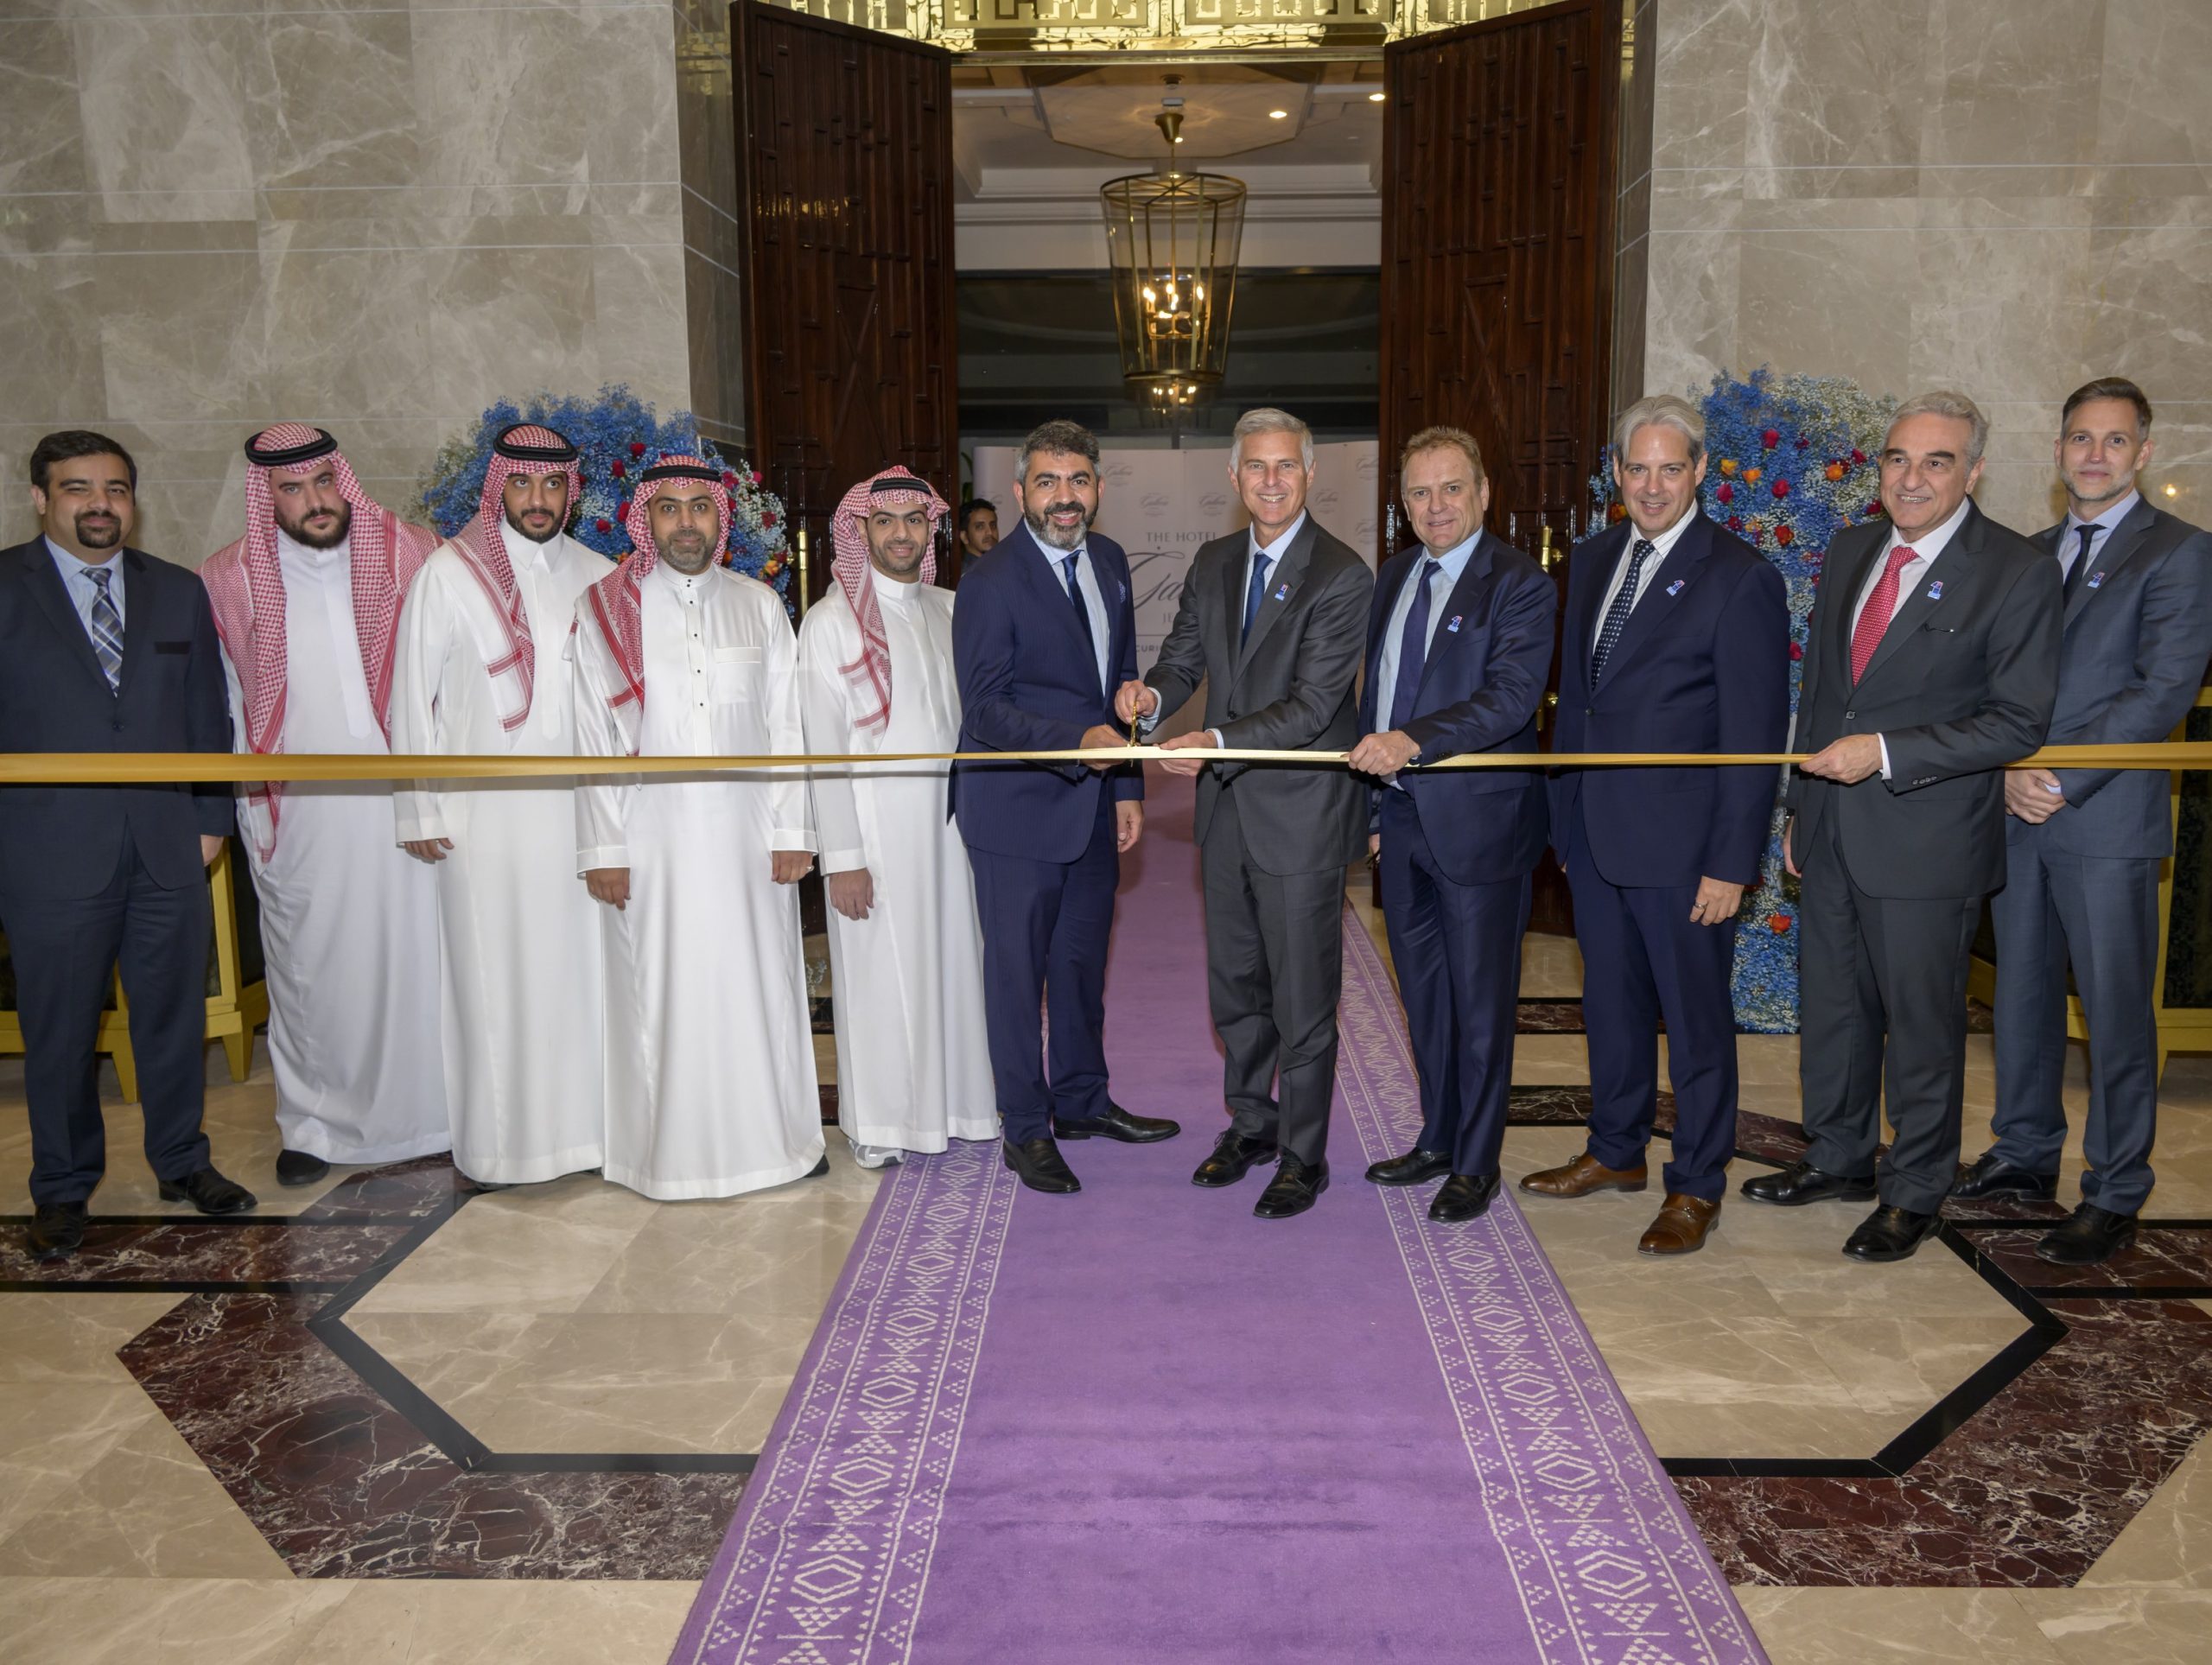 The Hotel Galleria Jeddah Curio Collection by Hilton Ribbon Cutting with Hilton President CEO Chris Nassetta and SEDCO Holding representatives